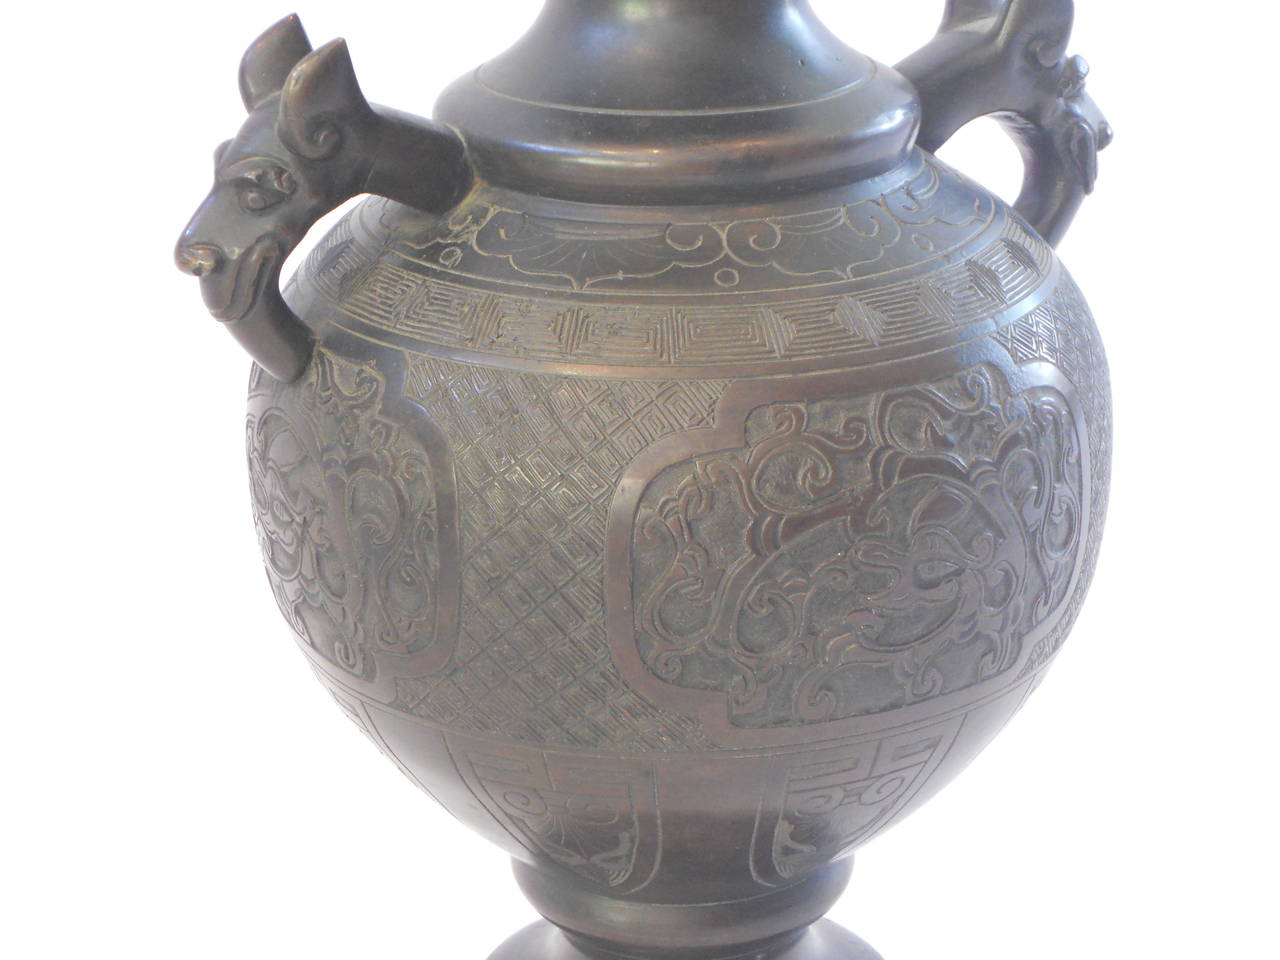 An early 20th century bronze vase on a wooden stand with dragon handles and beautifully detailed decoration throughout.